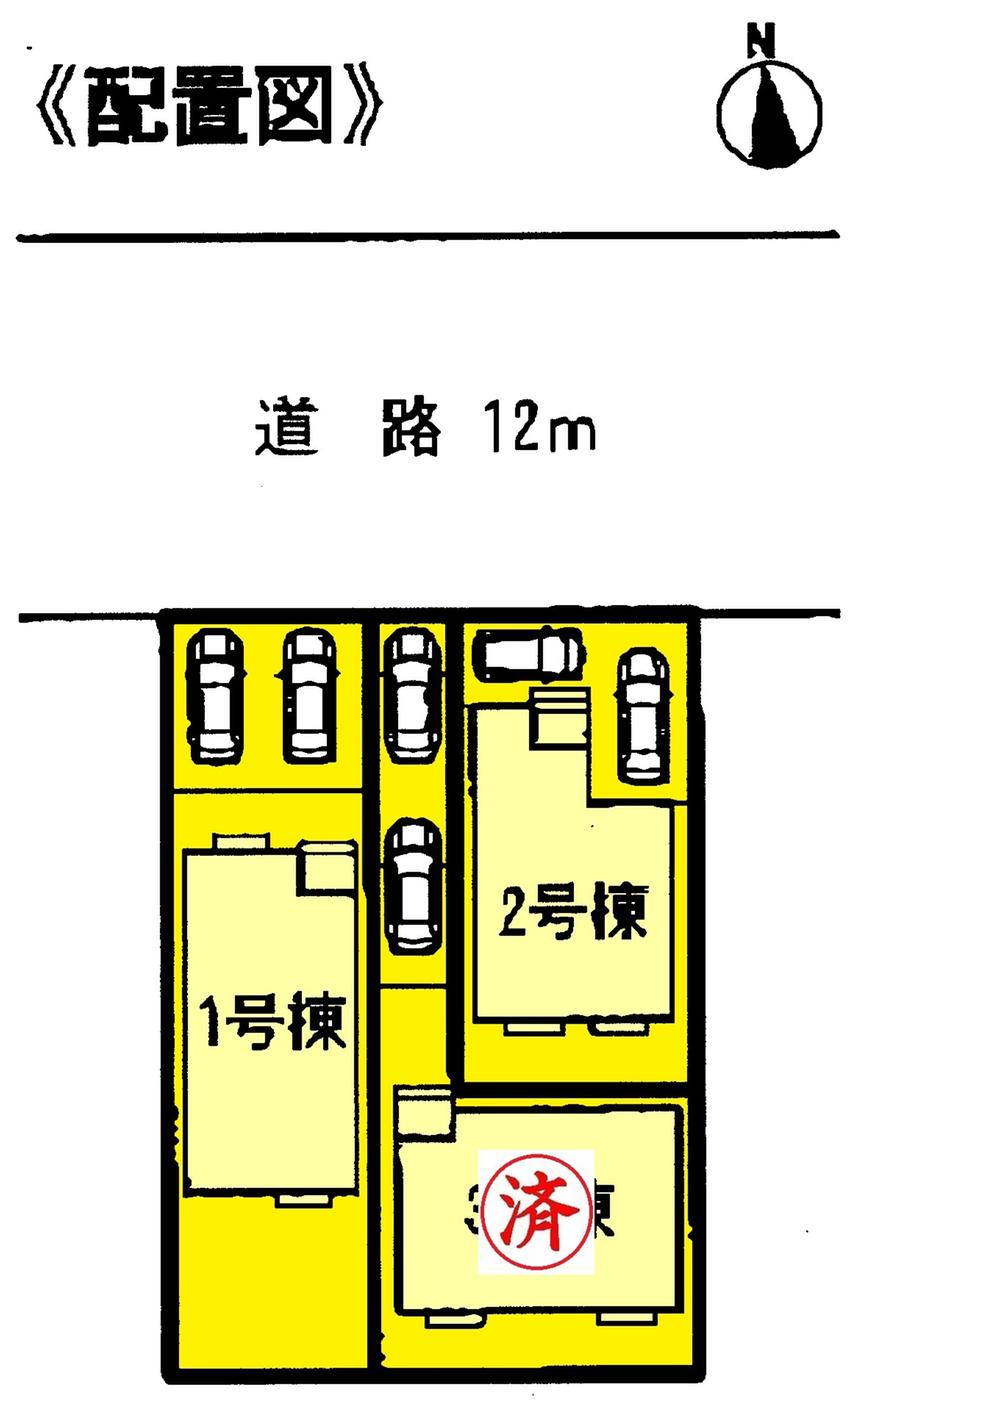 The entire compartment Figure. Parking two possible